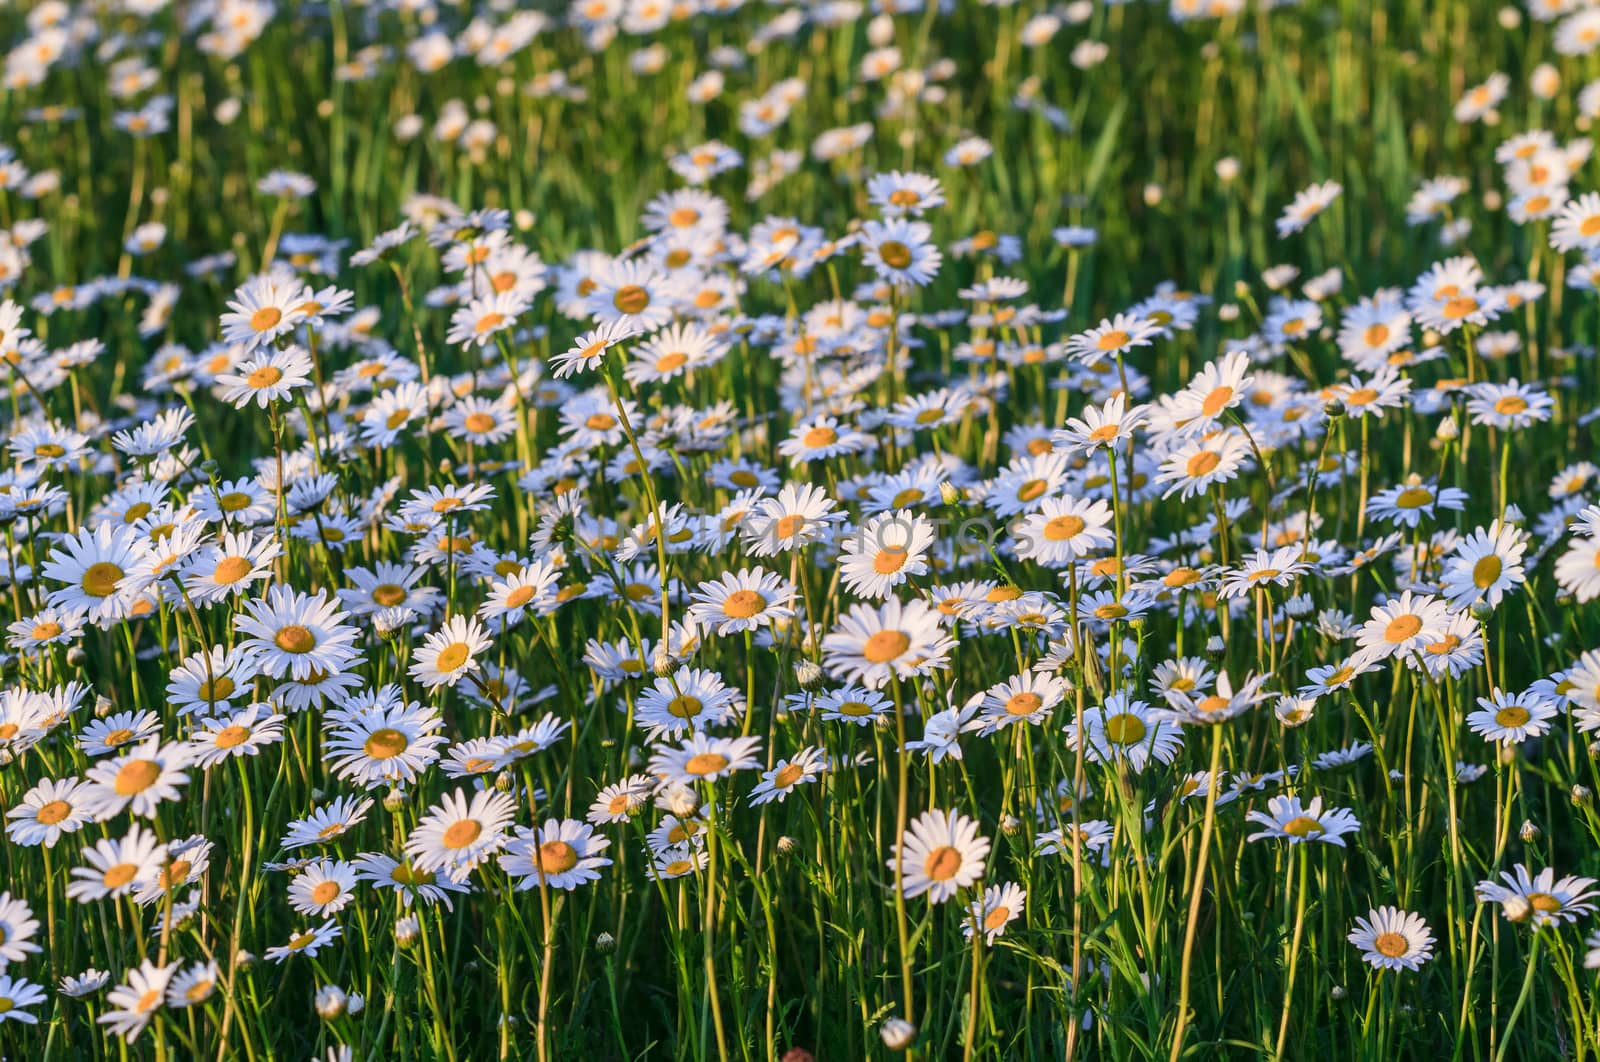 Wild chamomile flowers on a field on a sunny day. by fogen